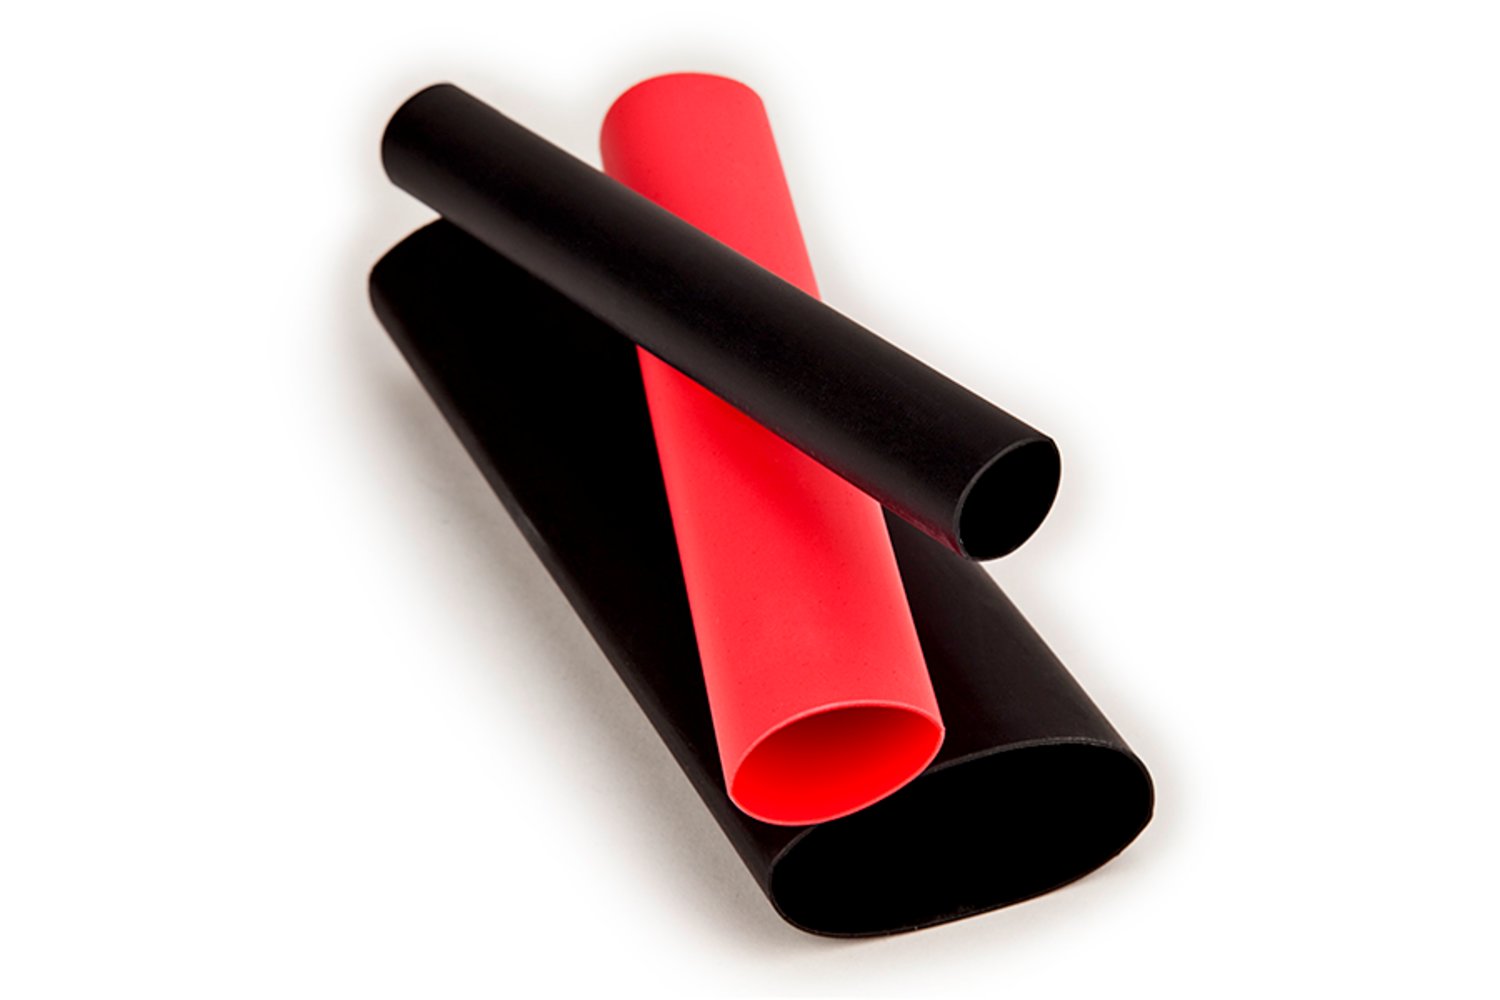 7010399047 - 3M Thin-Wall Heat Shrink Tubing EPS-300, Adhesive-Lined, 1/8" Red 48-in
stick, 250/Case